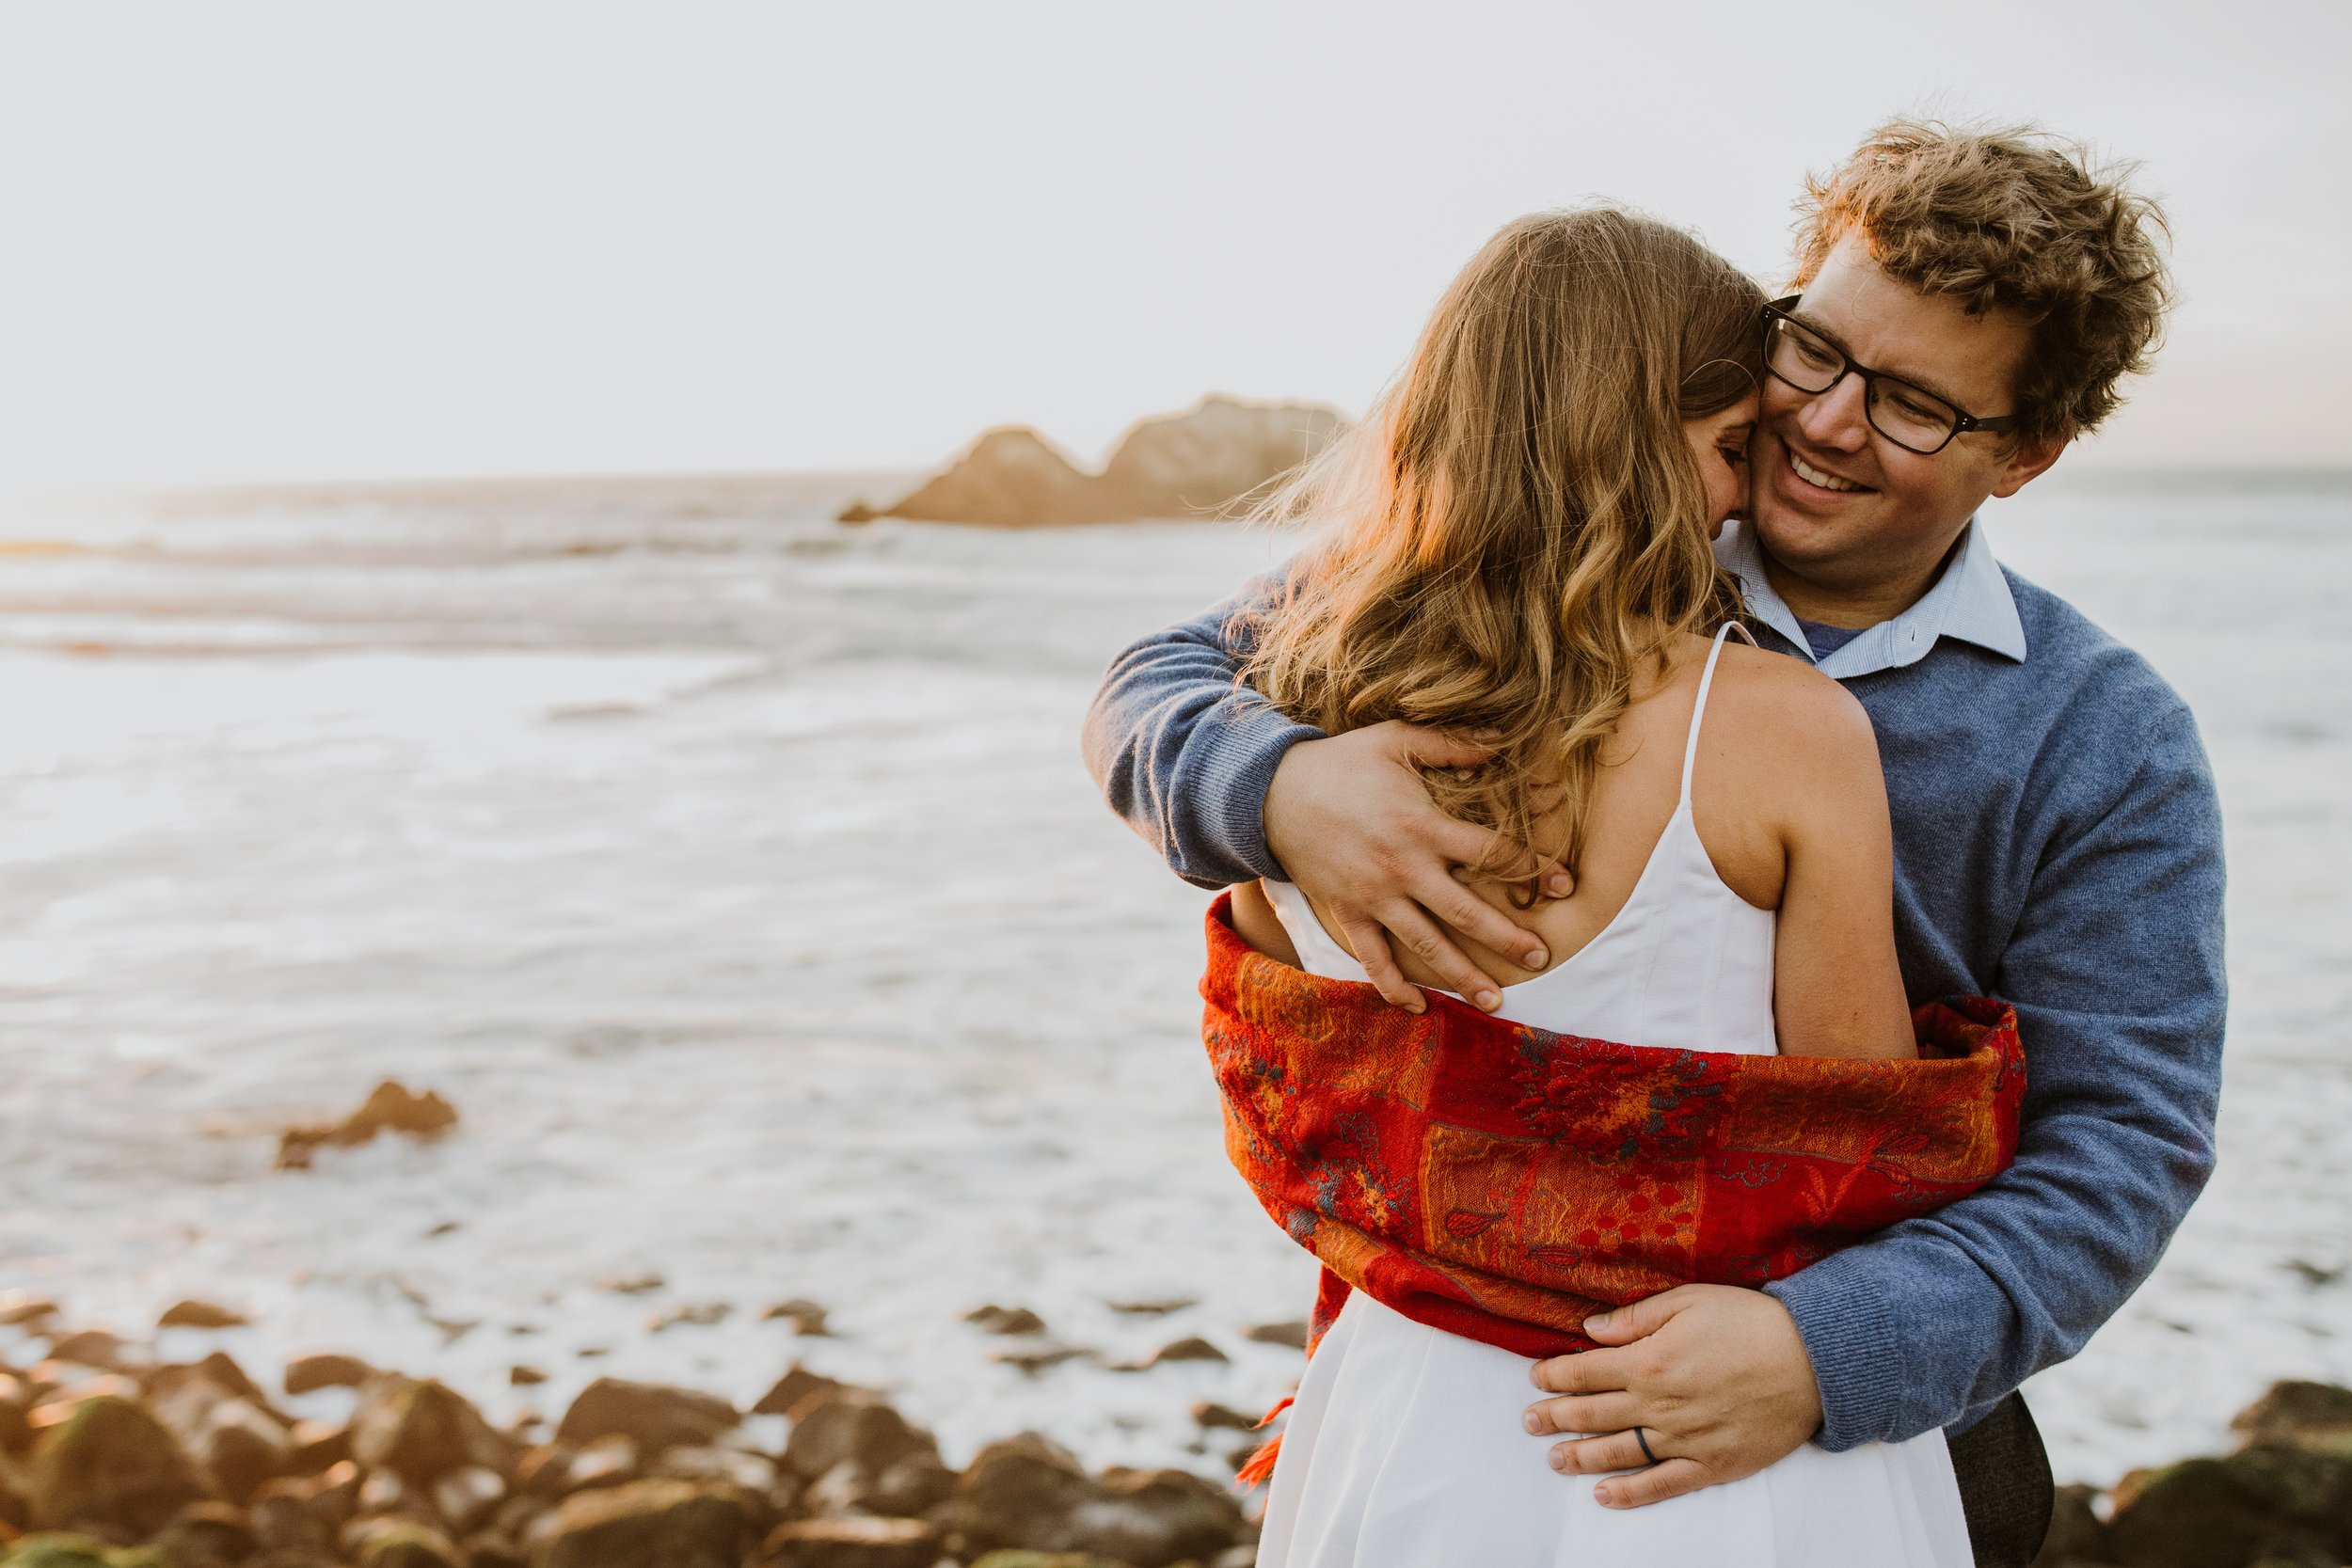 san francisco bay area photographer bre thurston | pacific coast outdoor engagement shoot | happy couple at sunset